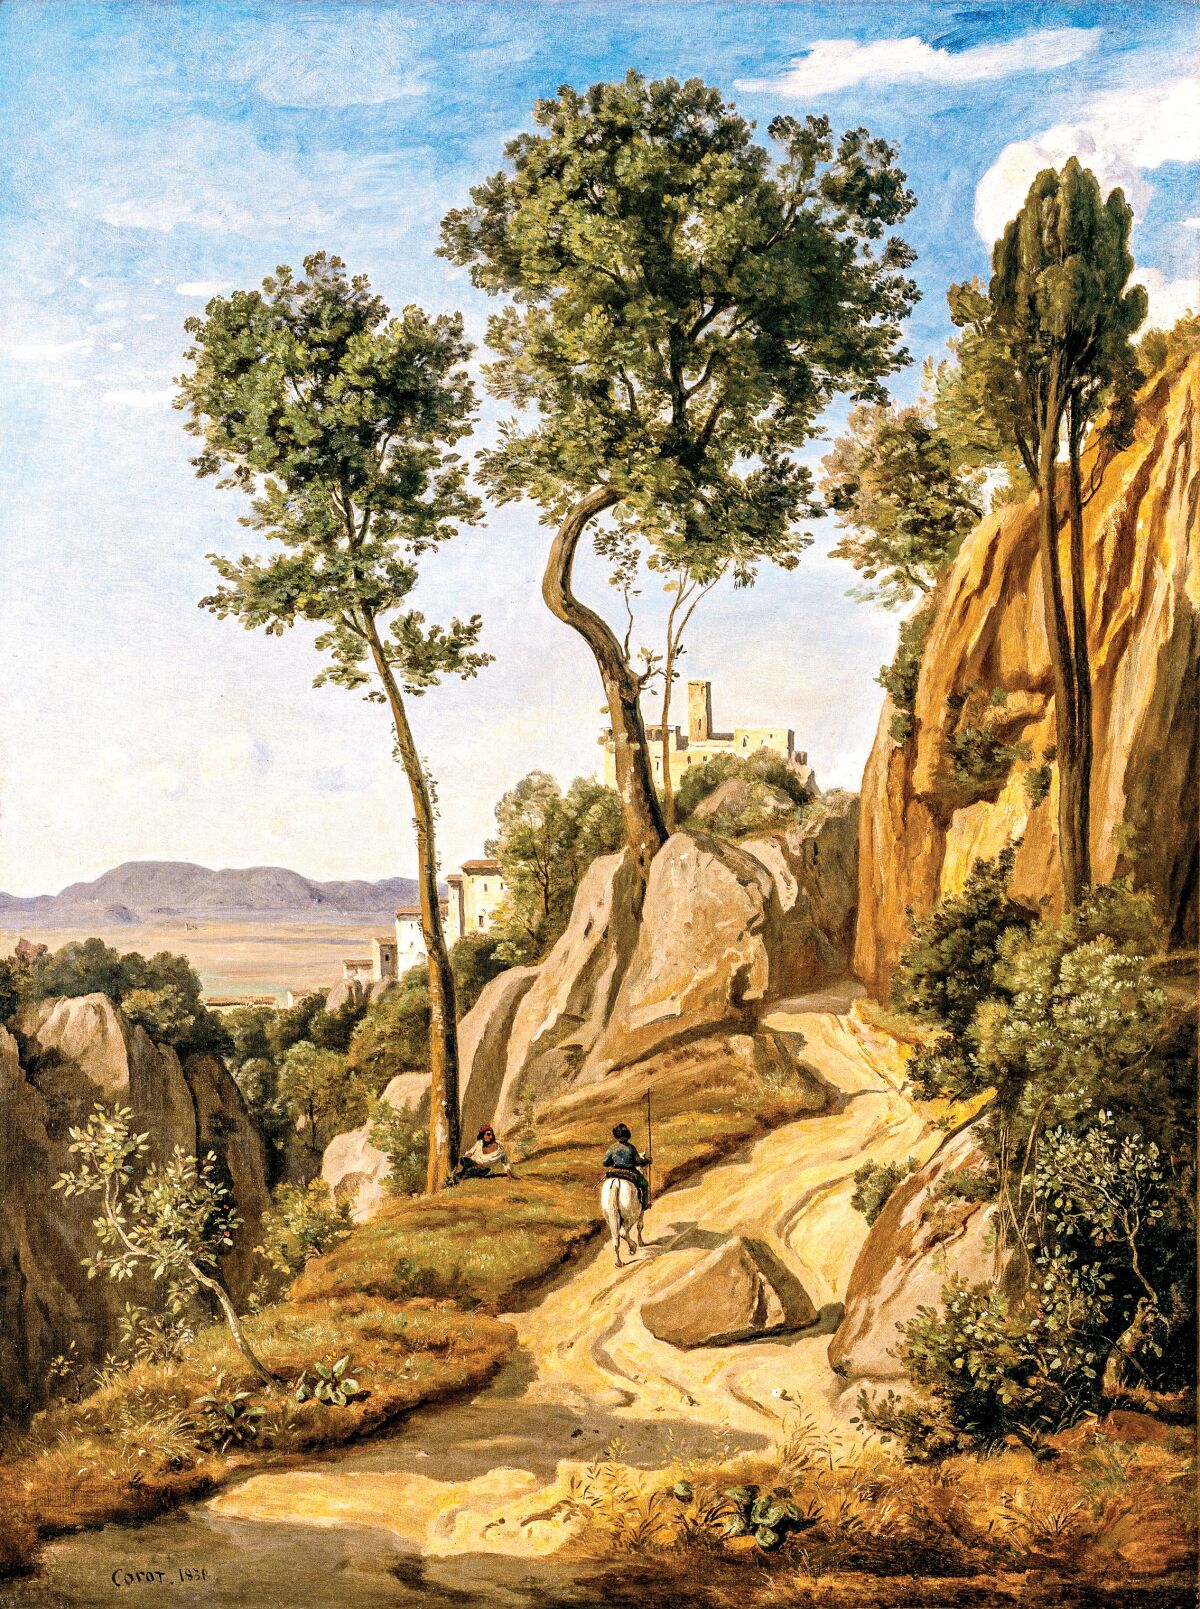 Jean-Baptiste-Camille Corot, "View of Volterra" (1838)